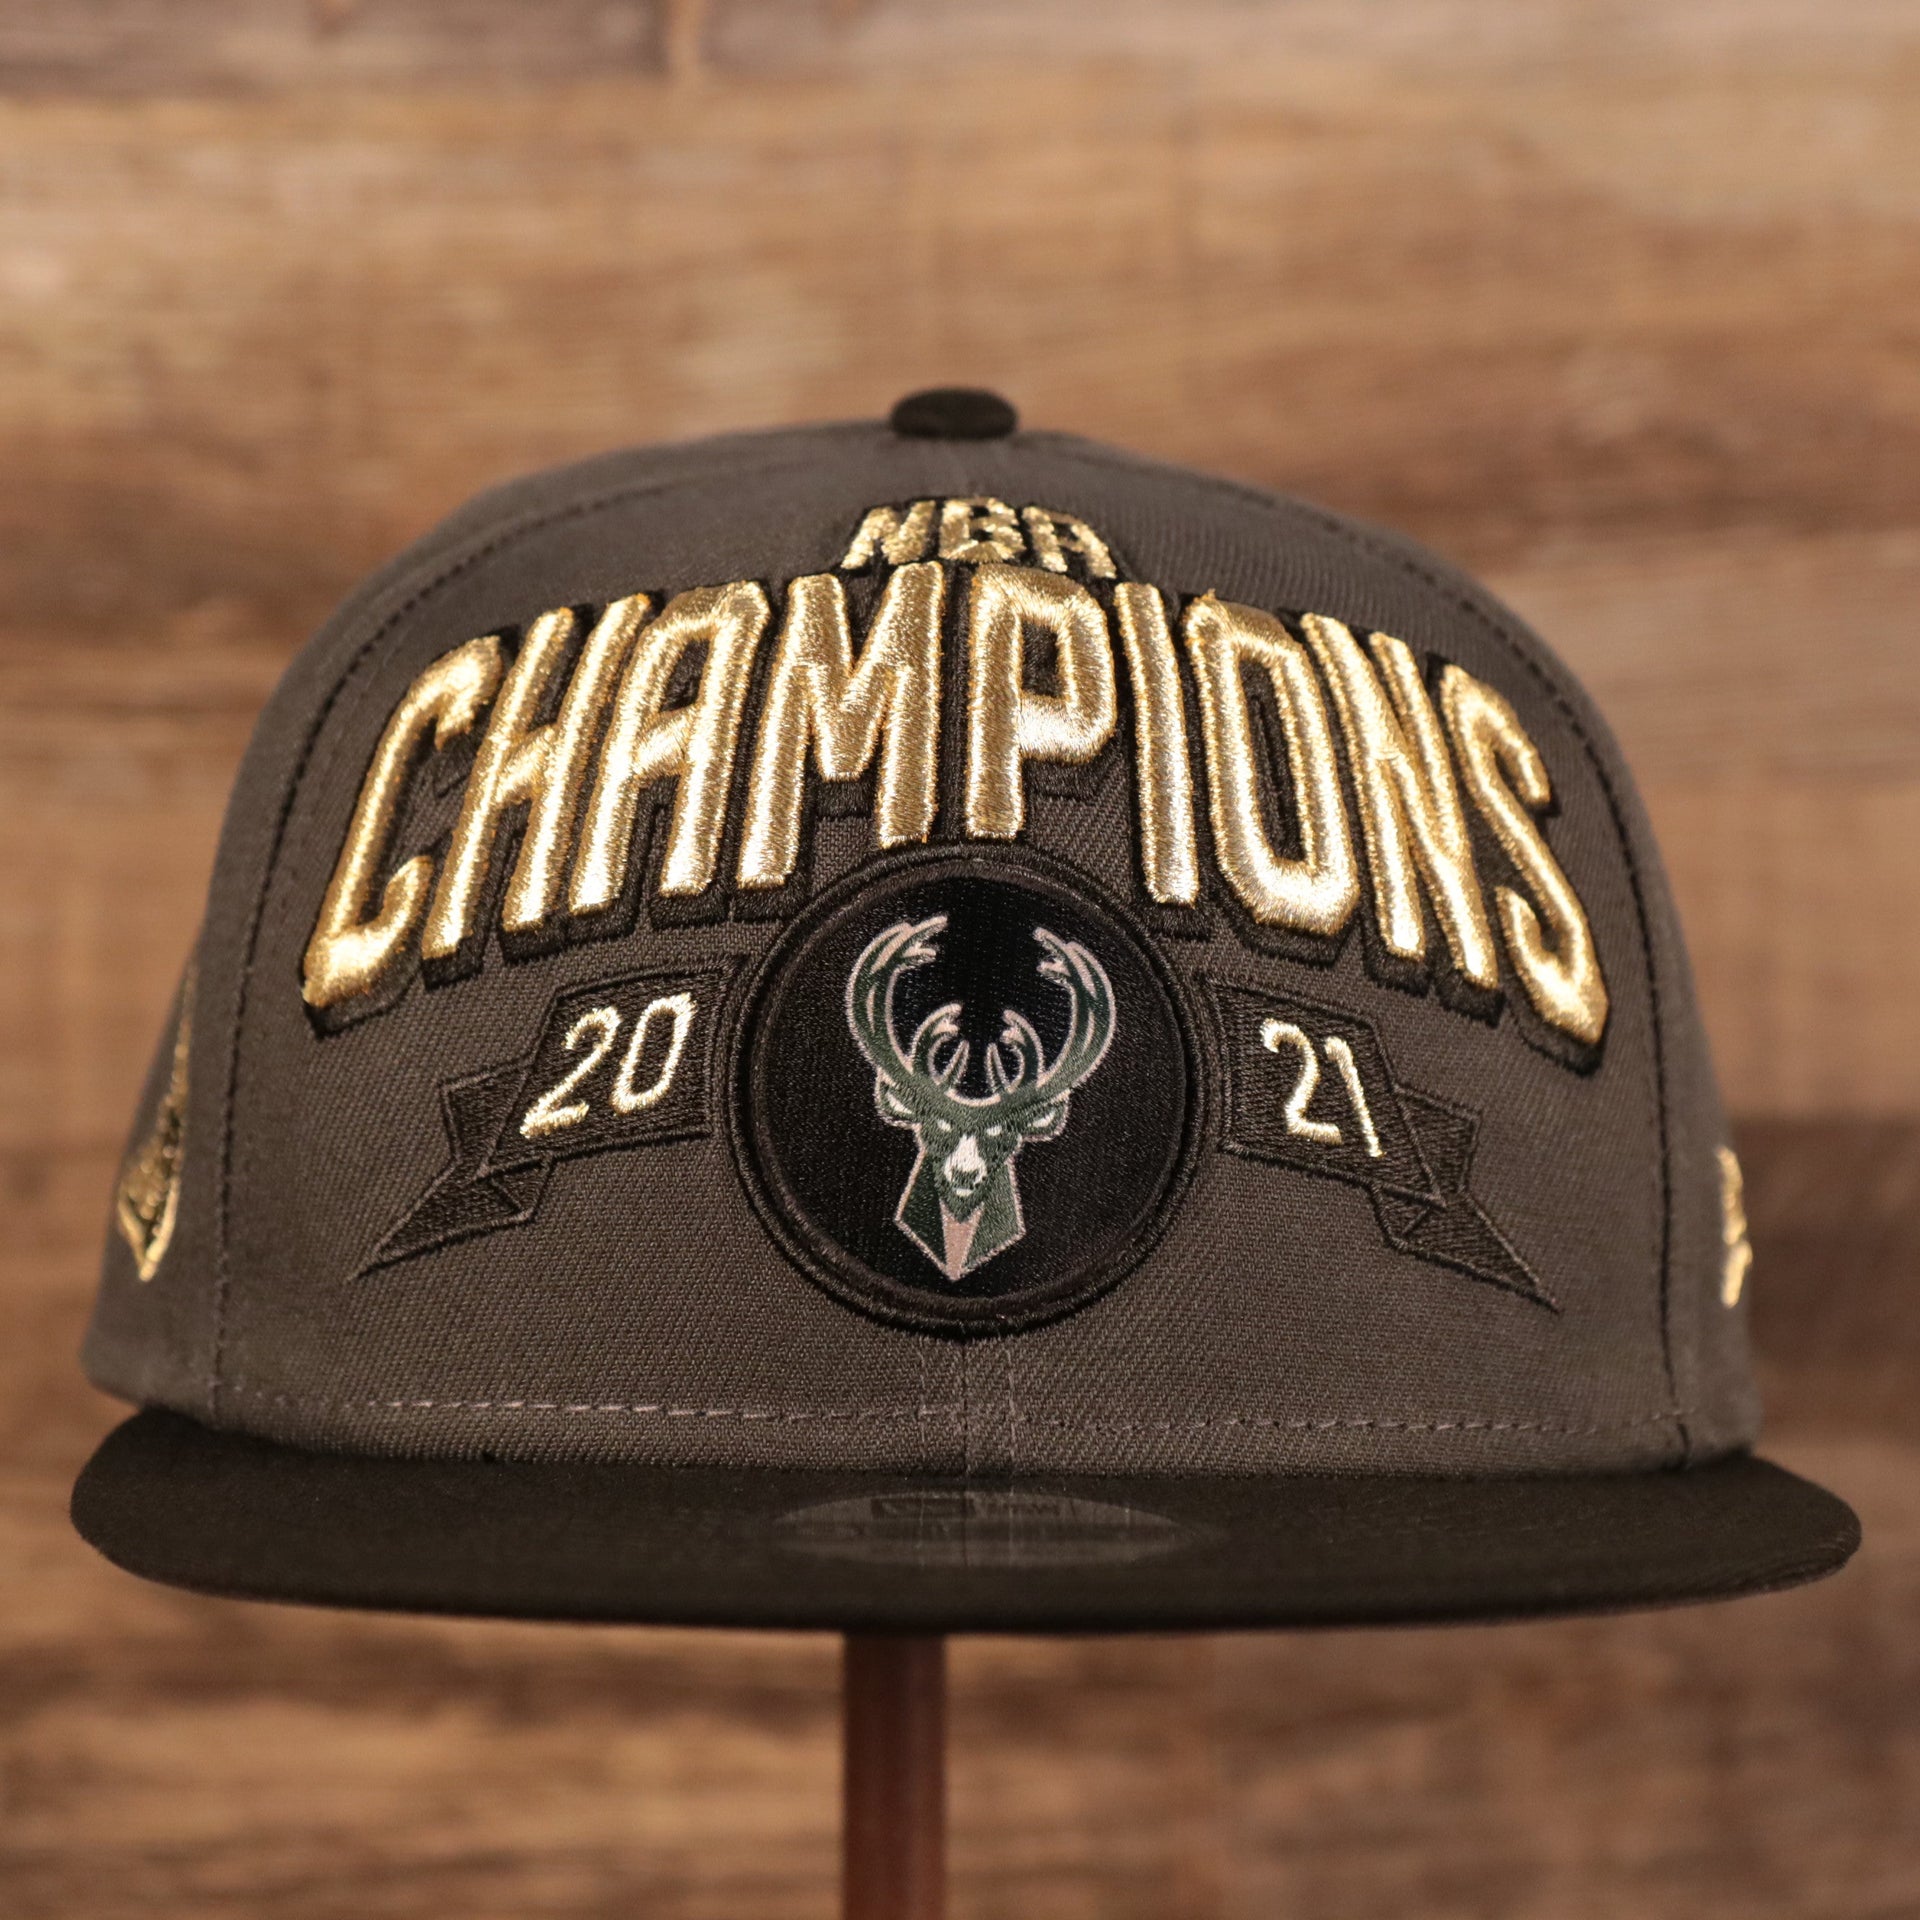 Embroidered on the front of the 2021 Milwaukee Bucks NBA Championship snapback hat is the lettering NBA Champions 2021 in metallic gold above the Milwaukee Bucks logo patch